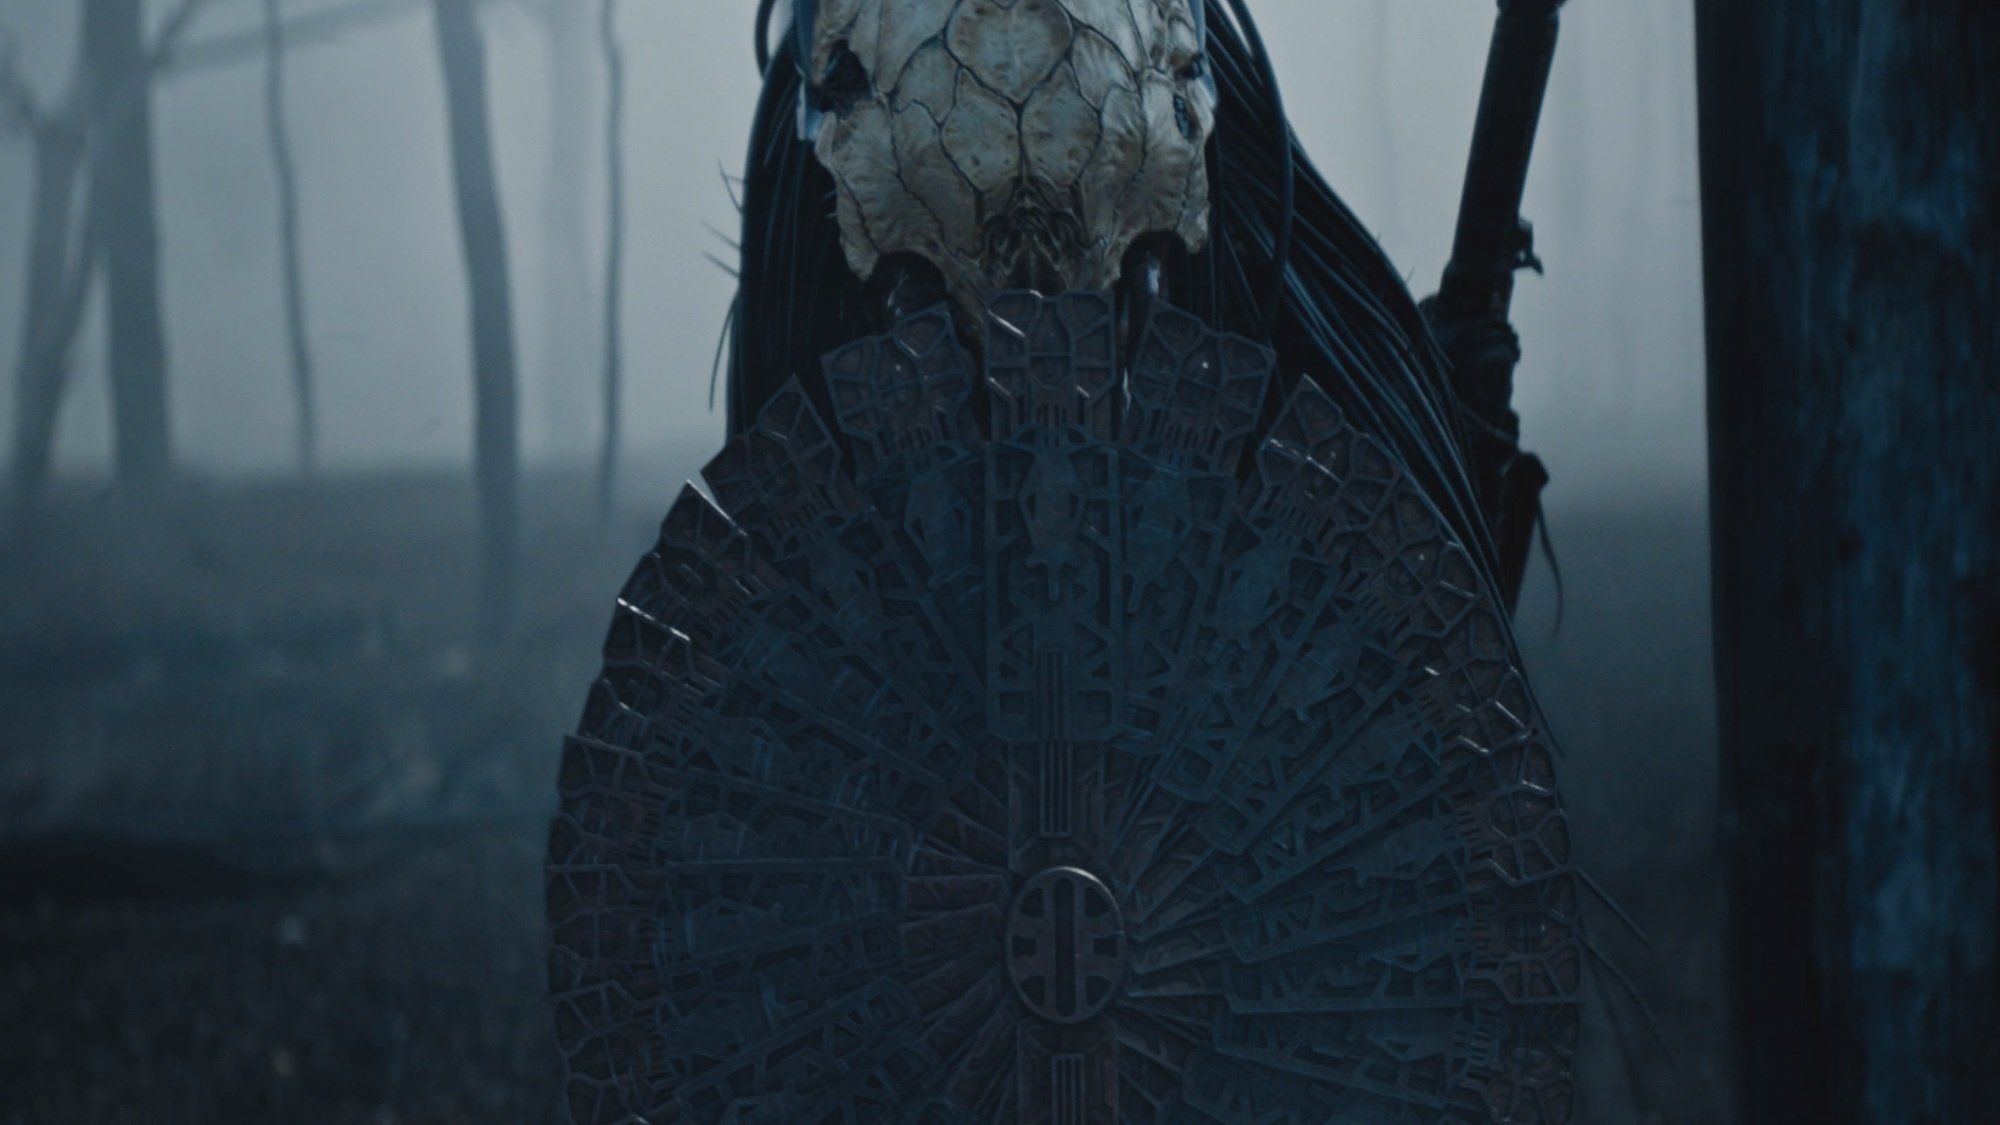 A humanoid alien with a white mask made of bone lifts up an ornate metal shield.